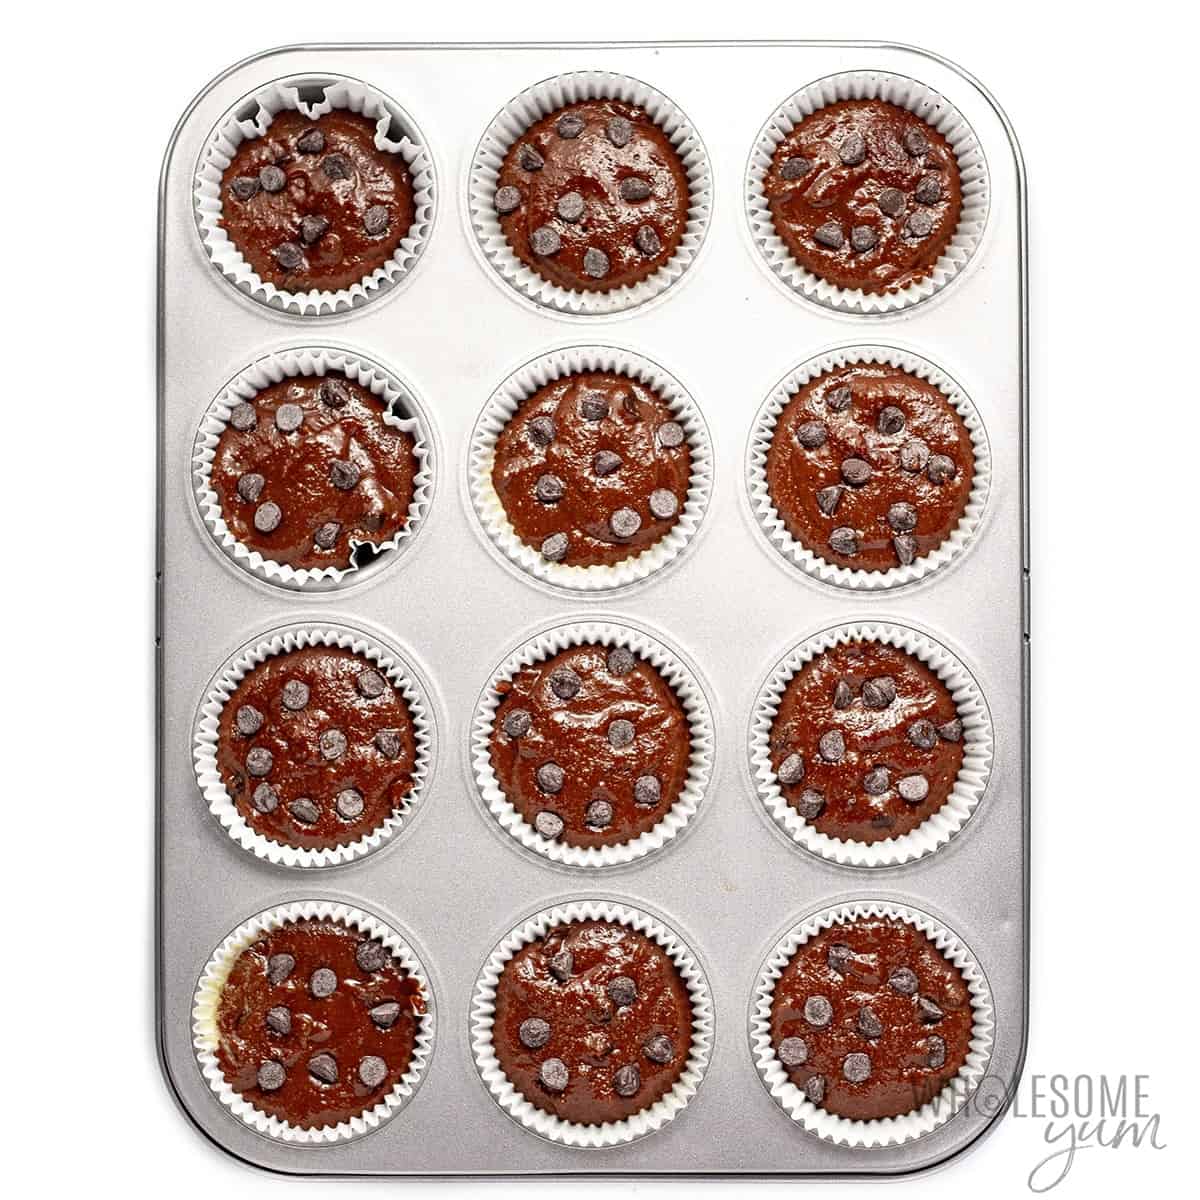 Muffin batter spooned into muffin tin